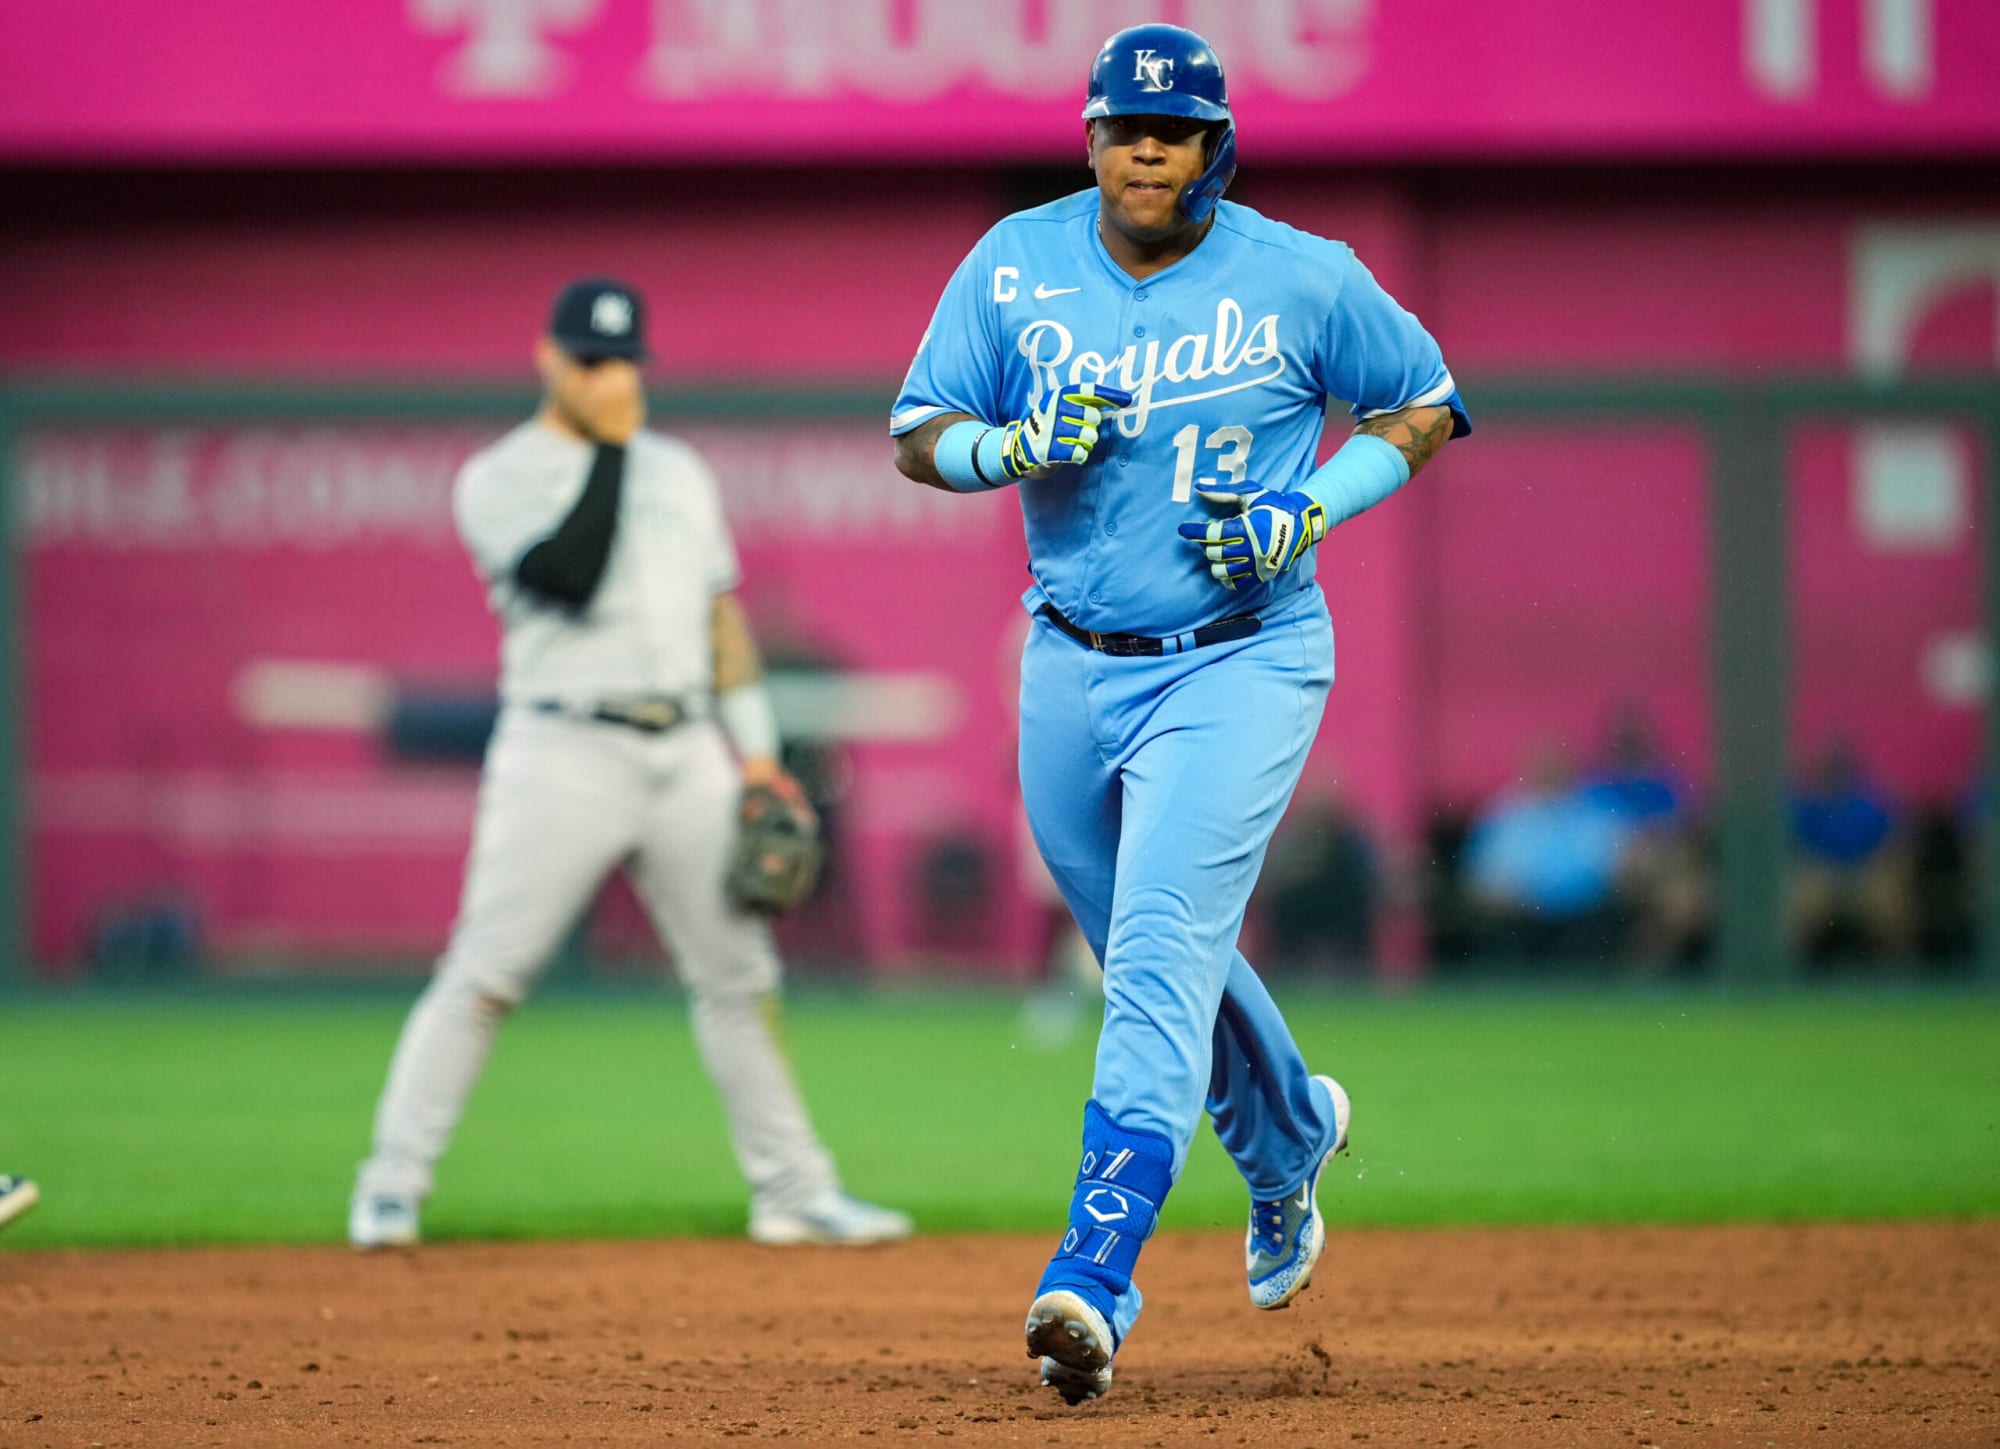 White Sox: There is no need to target Whit Merrifield in free-agency